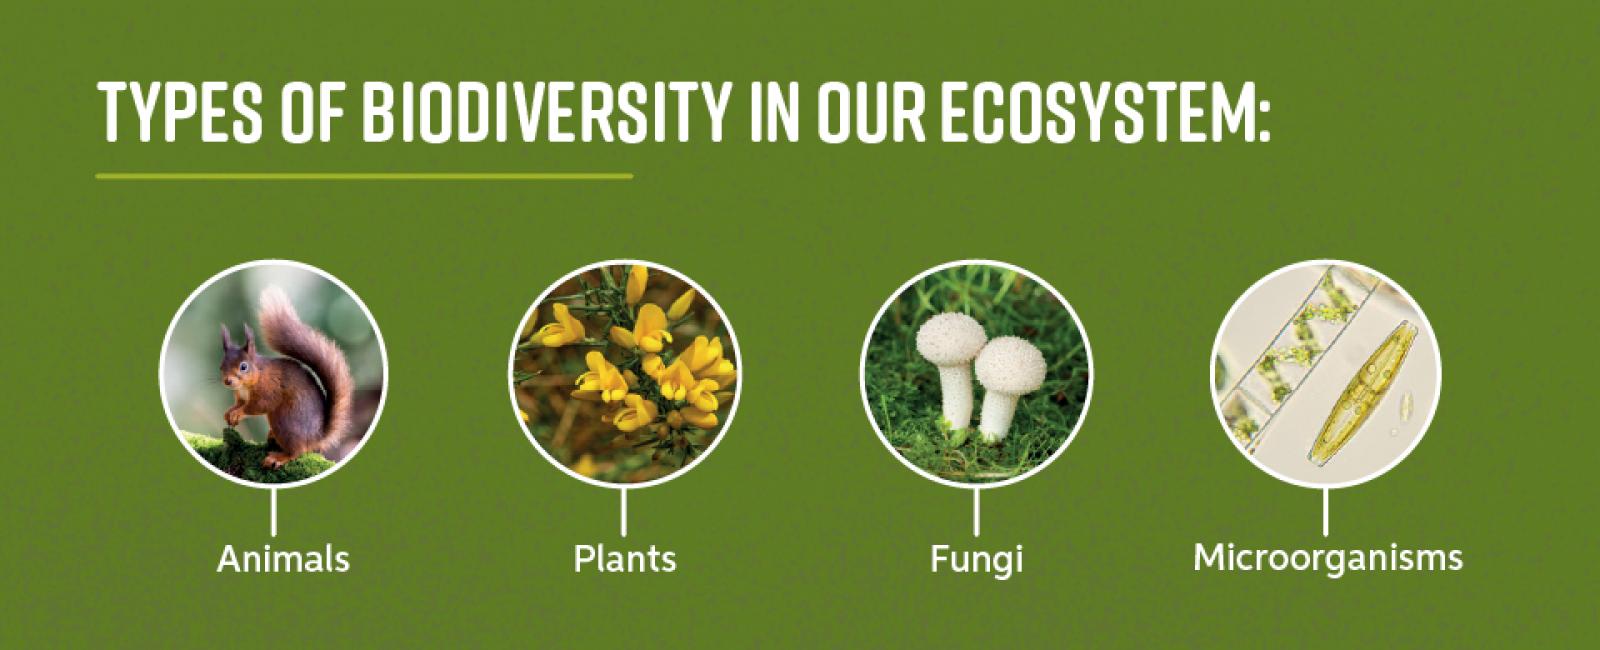 image showing tpyes of biodiversity in our ecosystem